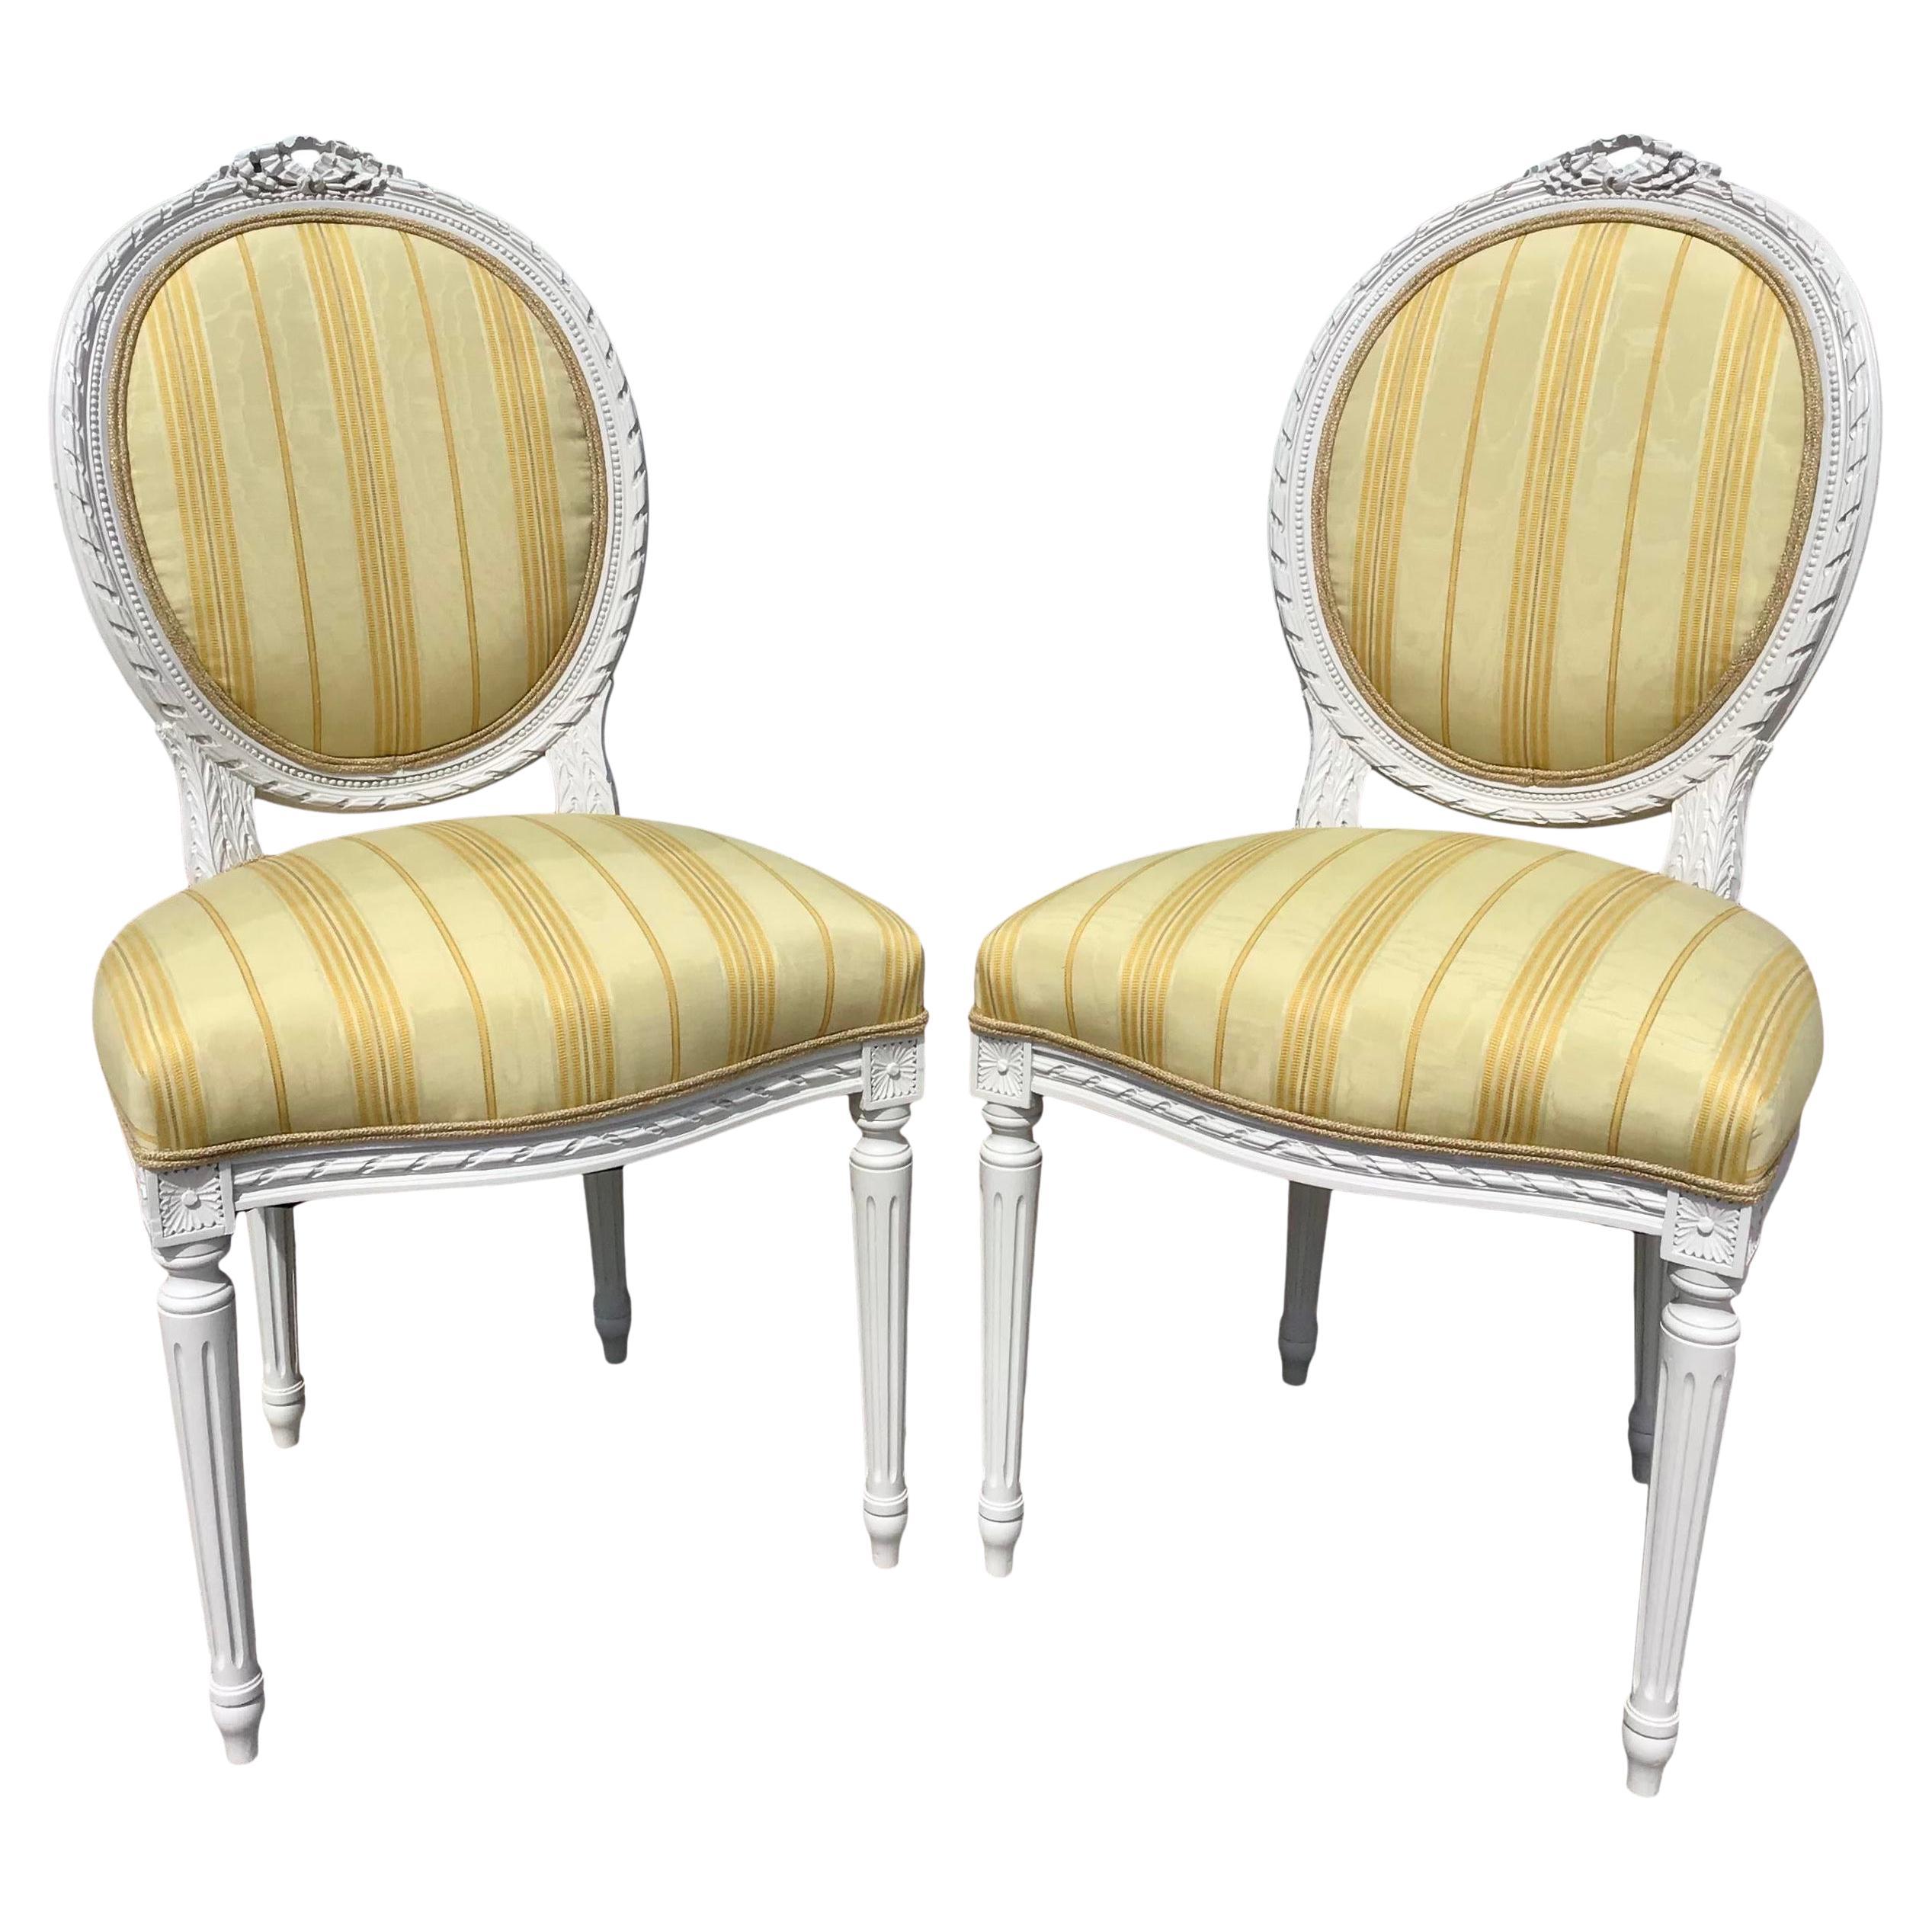 Classic French Louis XVI Side Chairs, a Pair For Sale